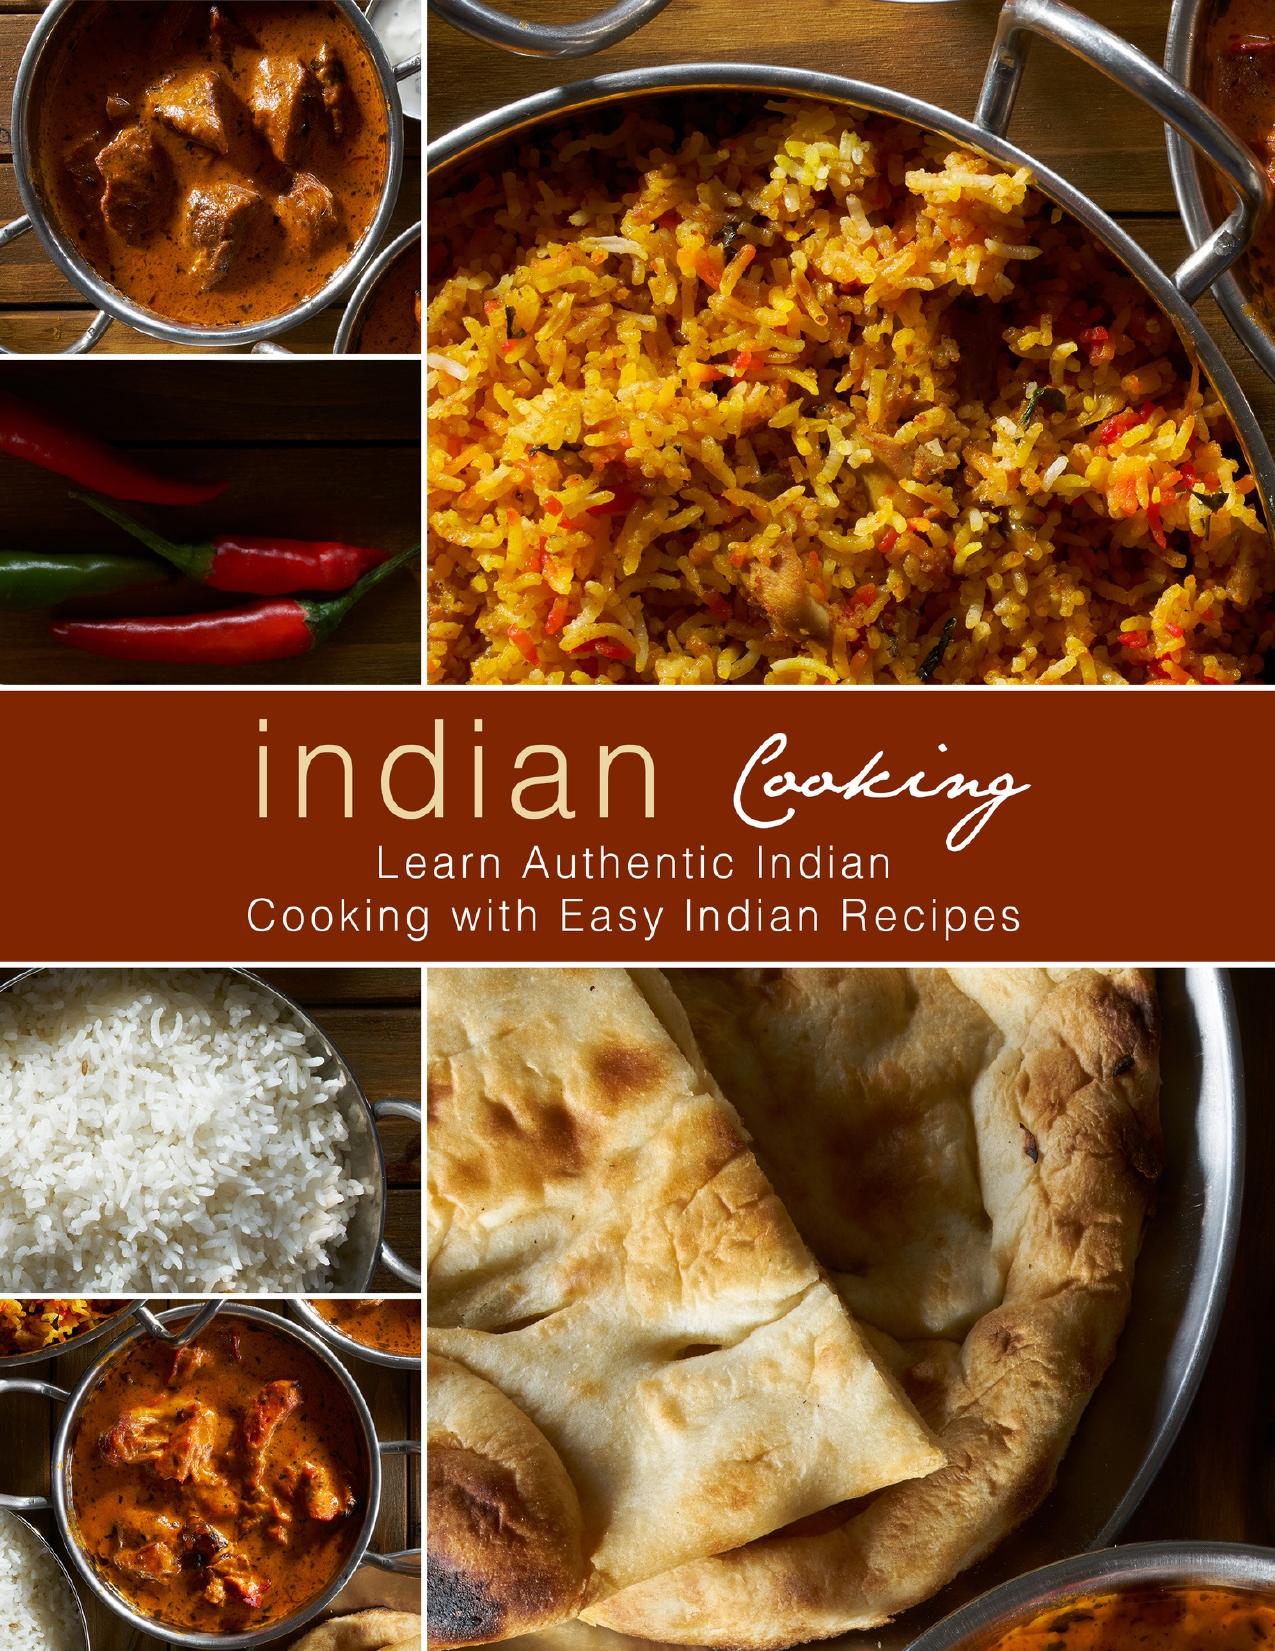 Indian Cooking: Learn Authentic Indian Cooking with Easy Indian Recipes by Press BookSumo